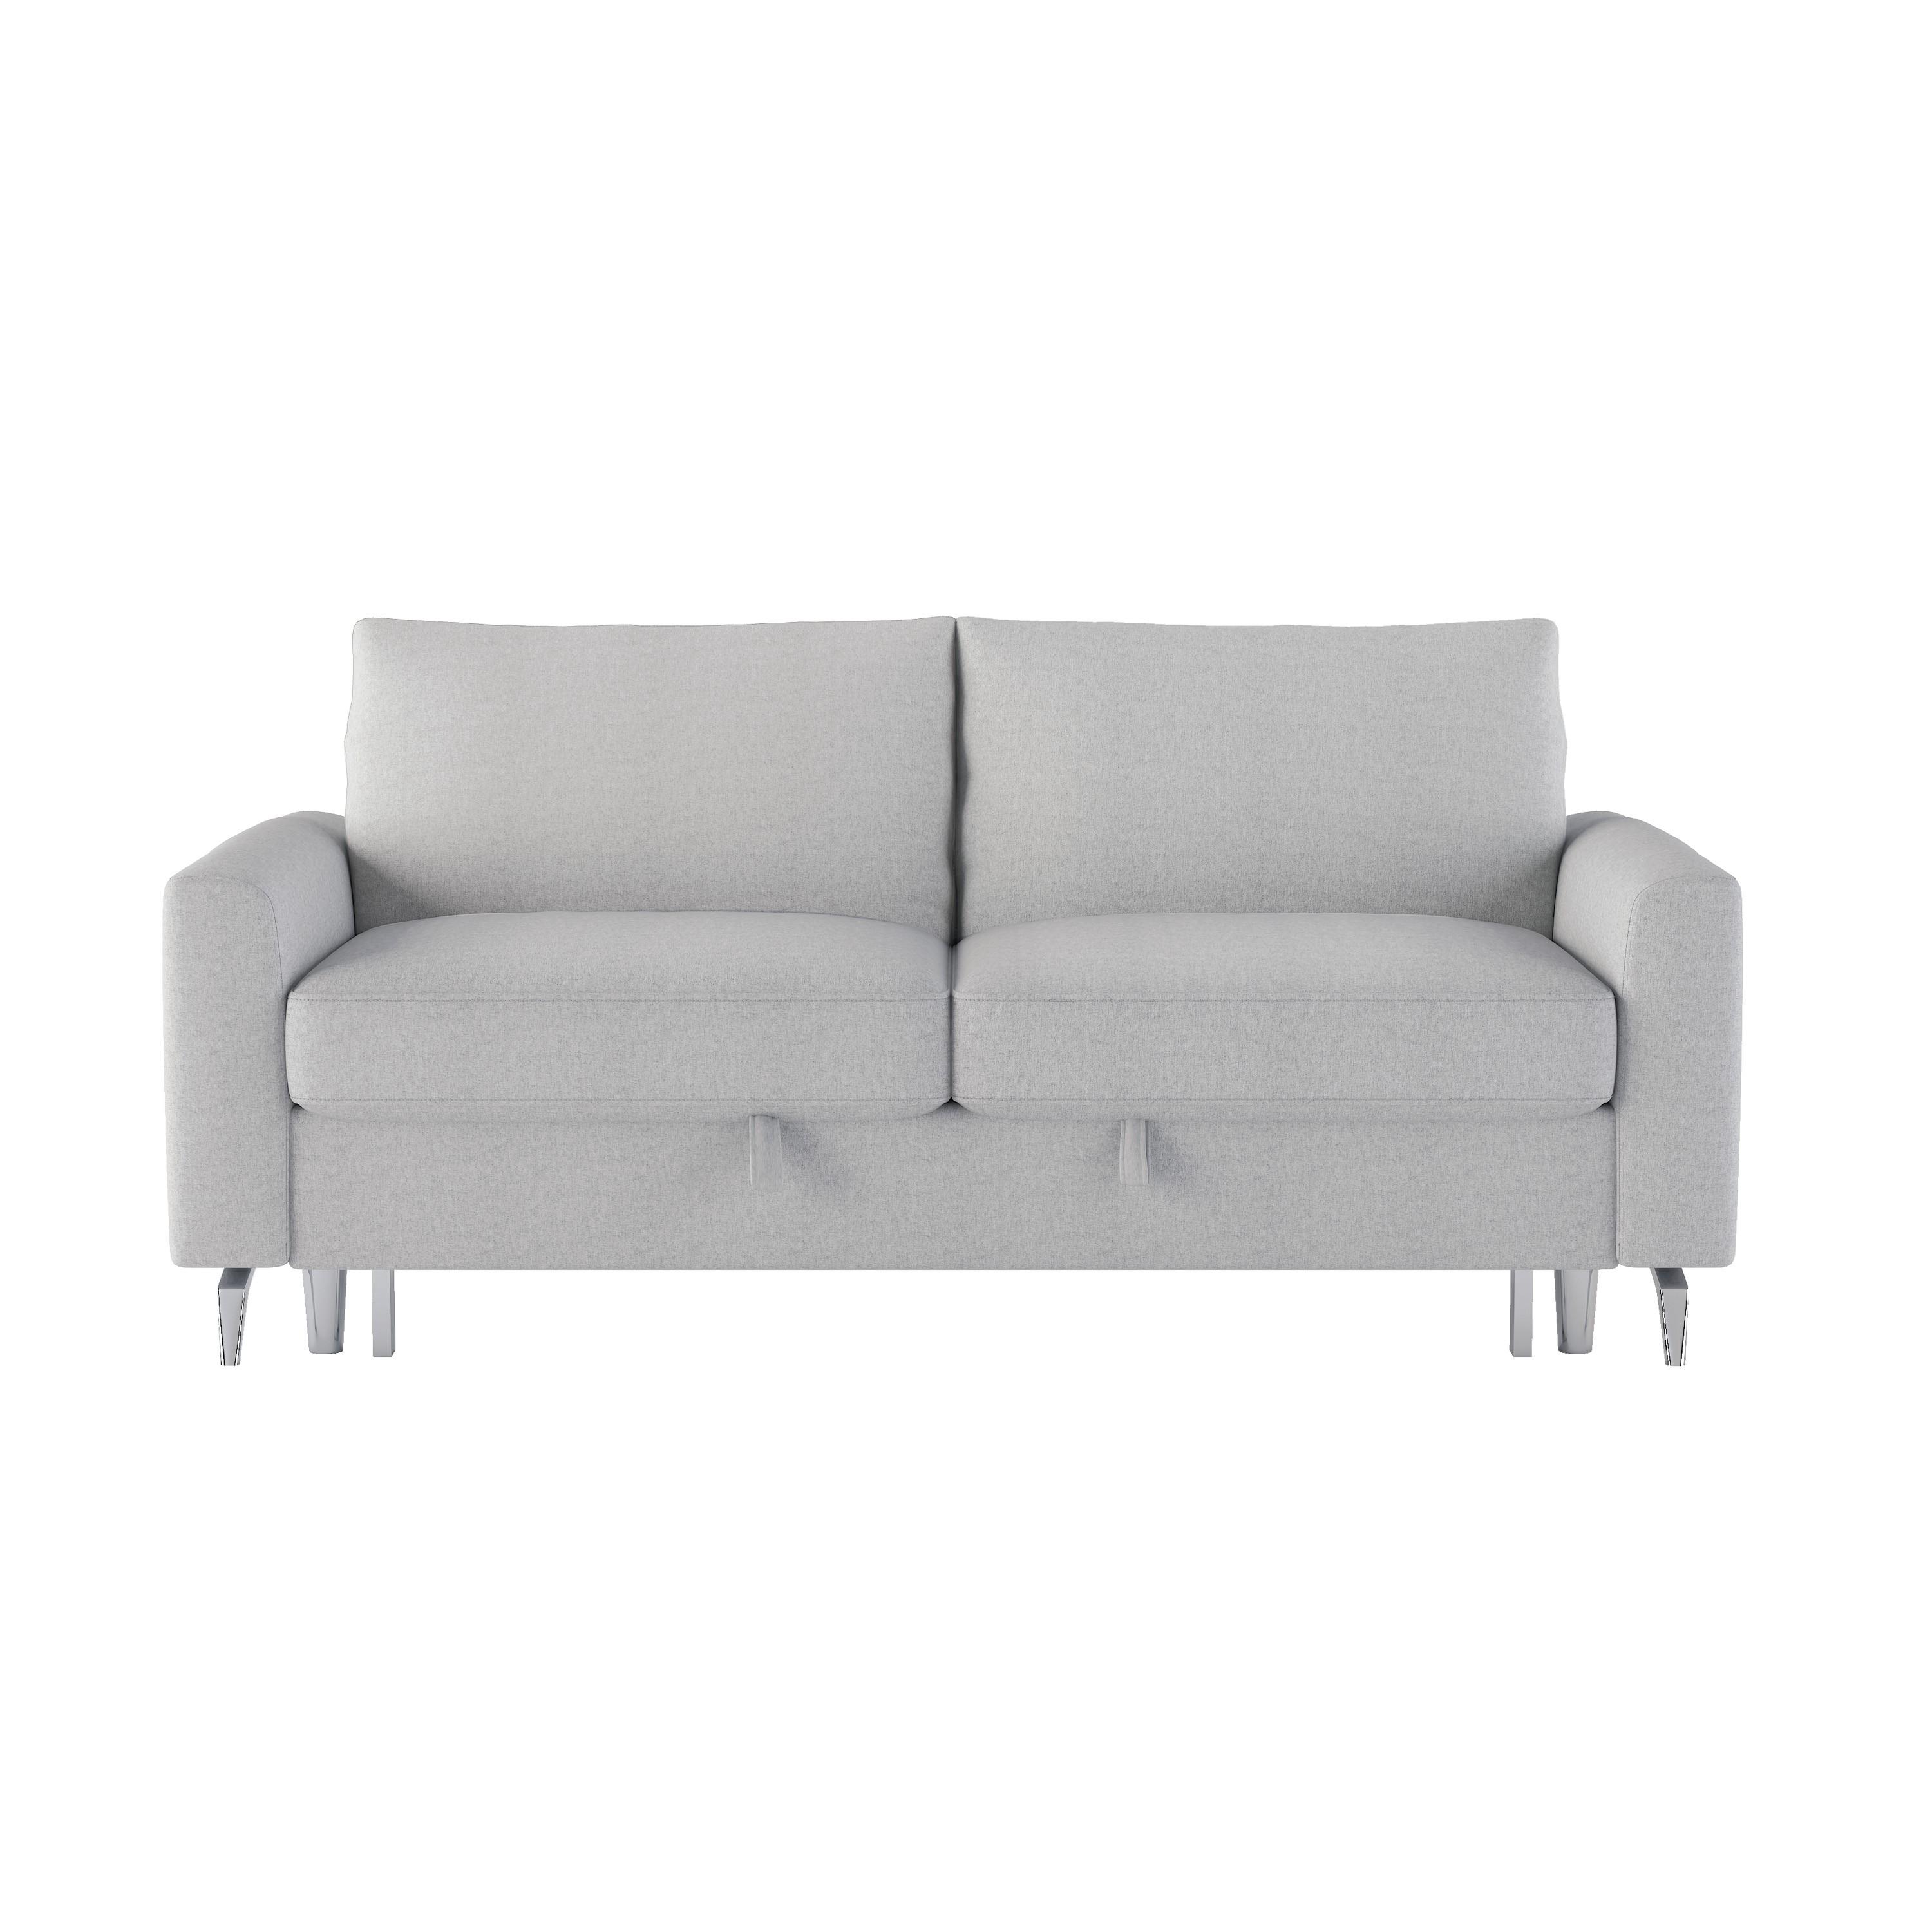 Contemporary Sofa 9525GRY-3CL Price 9525GRY-3CL in Gray 